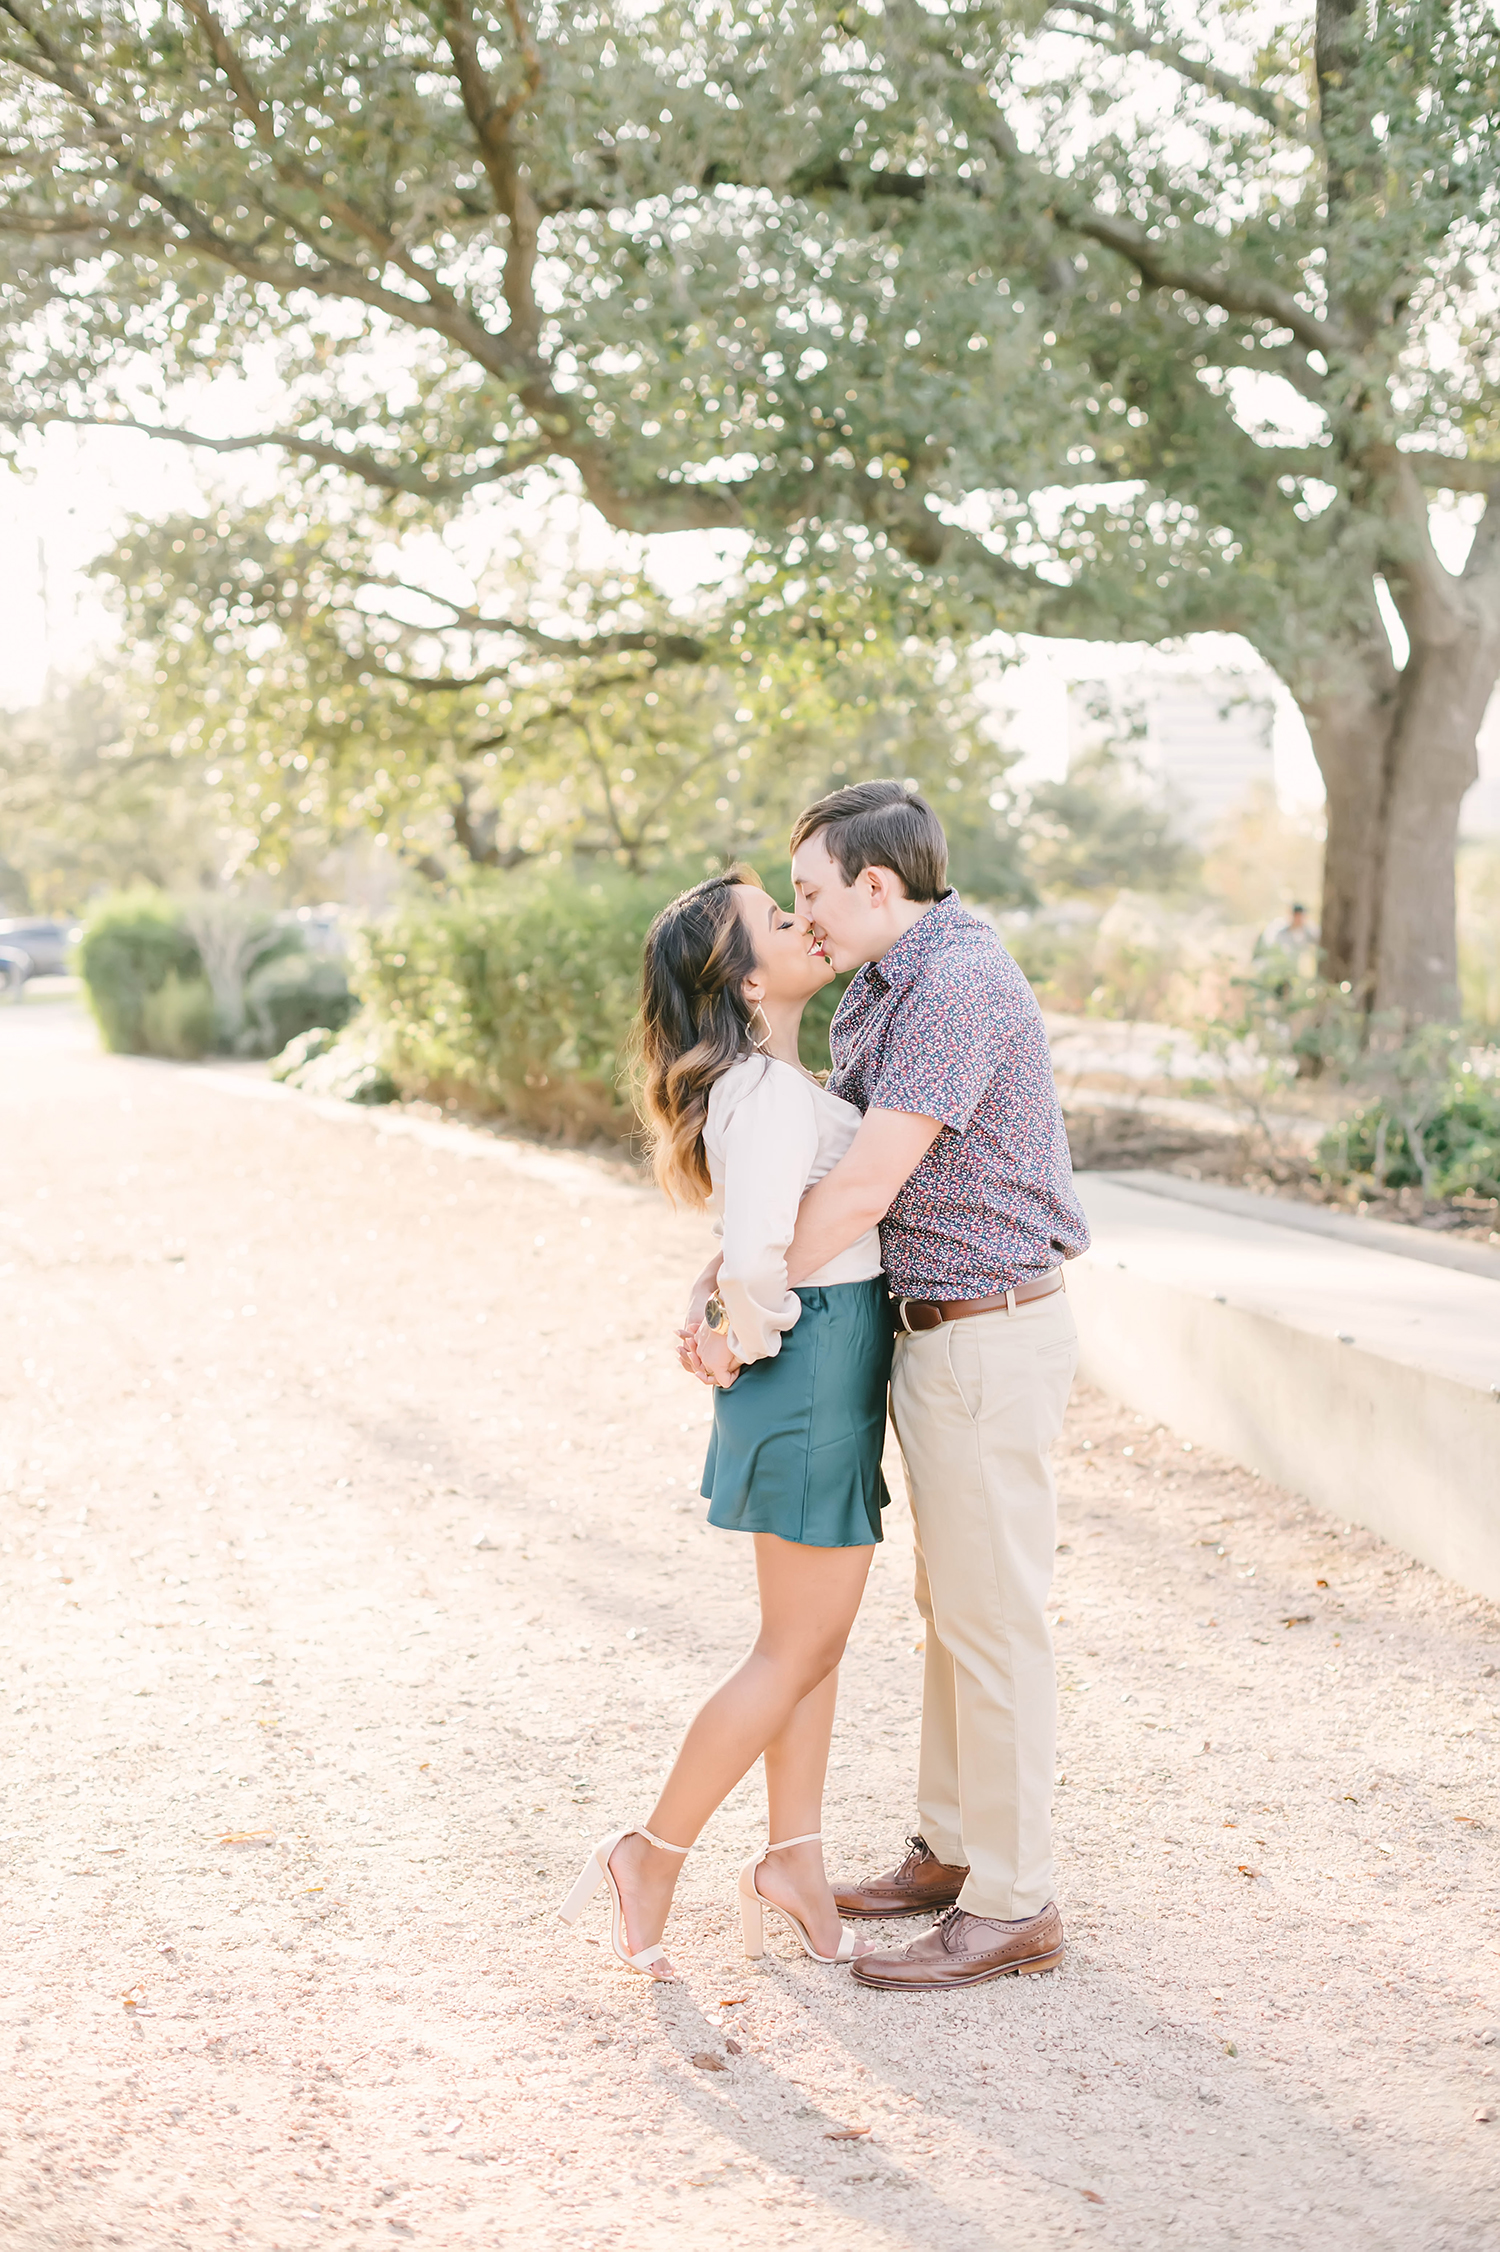 A beautiful springtime engagement session in Downtown Houston, Texas with Christina Elliot Photography. Kisses future bride and groom she said yes semi formal outfit wear inspo outdoor engagement shoot houston texas photographer white high heels teal skirt #christinaelliotphotography #houstonweddingphotographer #engagementpics #houstonphotographer #engagementphotos #shesaidyes #texasphotographer #photoinspiration #weddingphotography #houstonphotographer